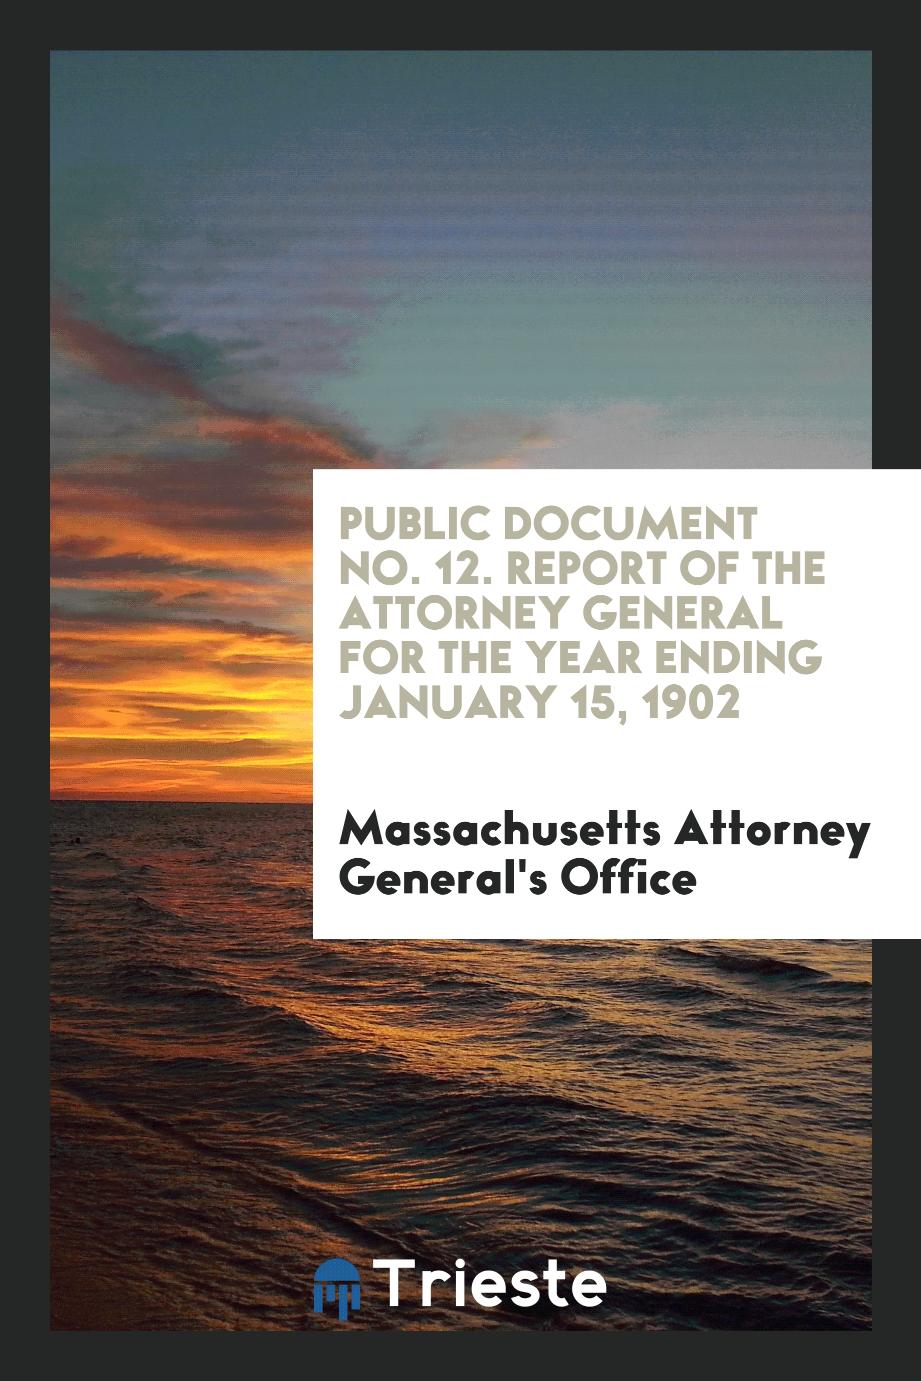 Public document No. 12. Report of the attorney general for the year ending January 15, 1902